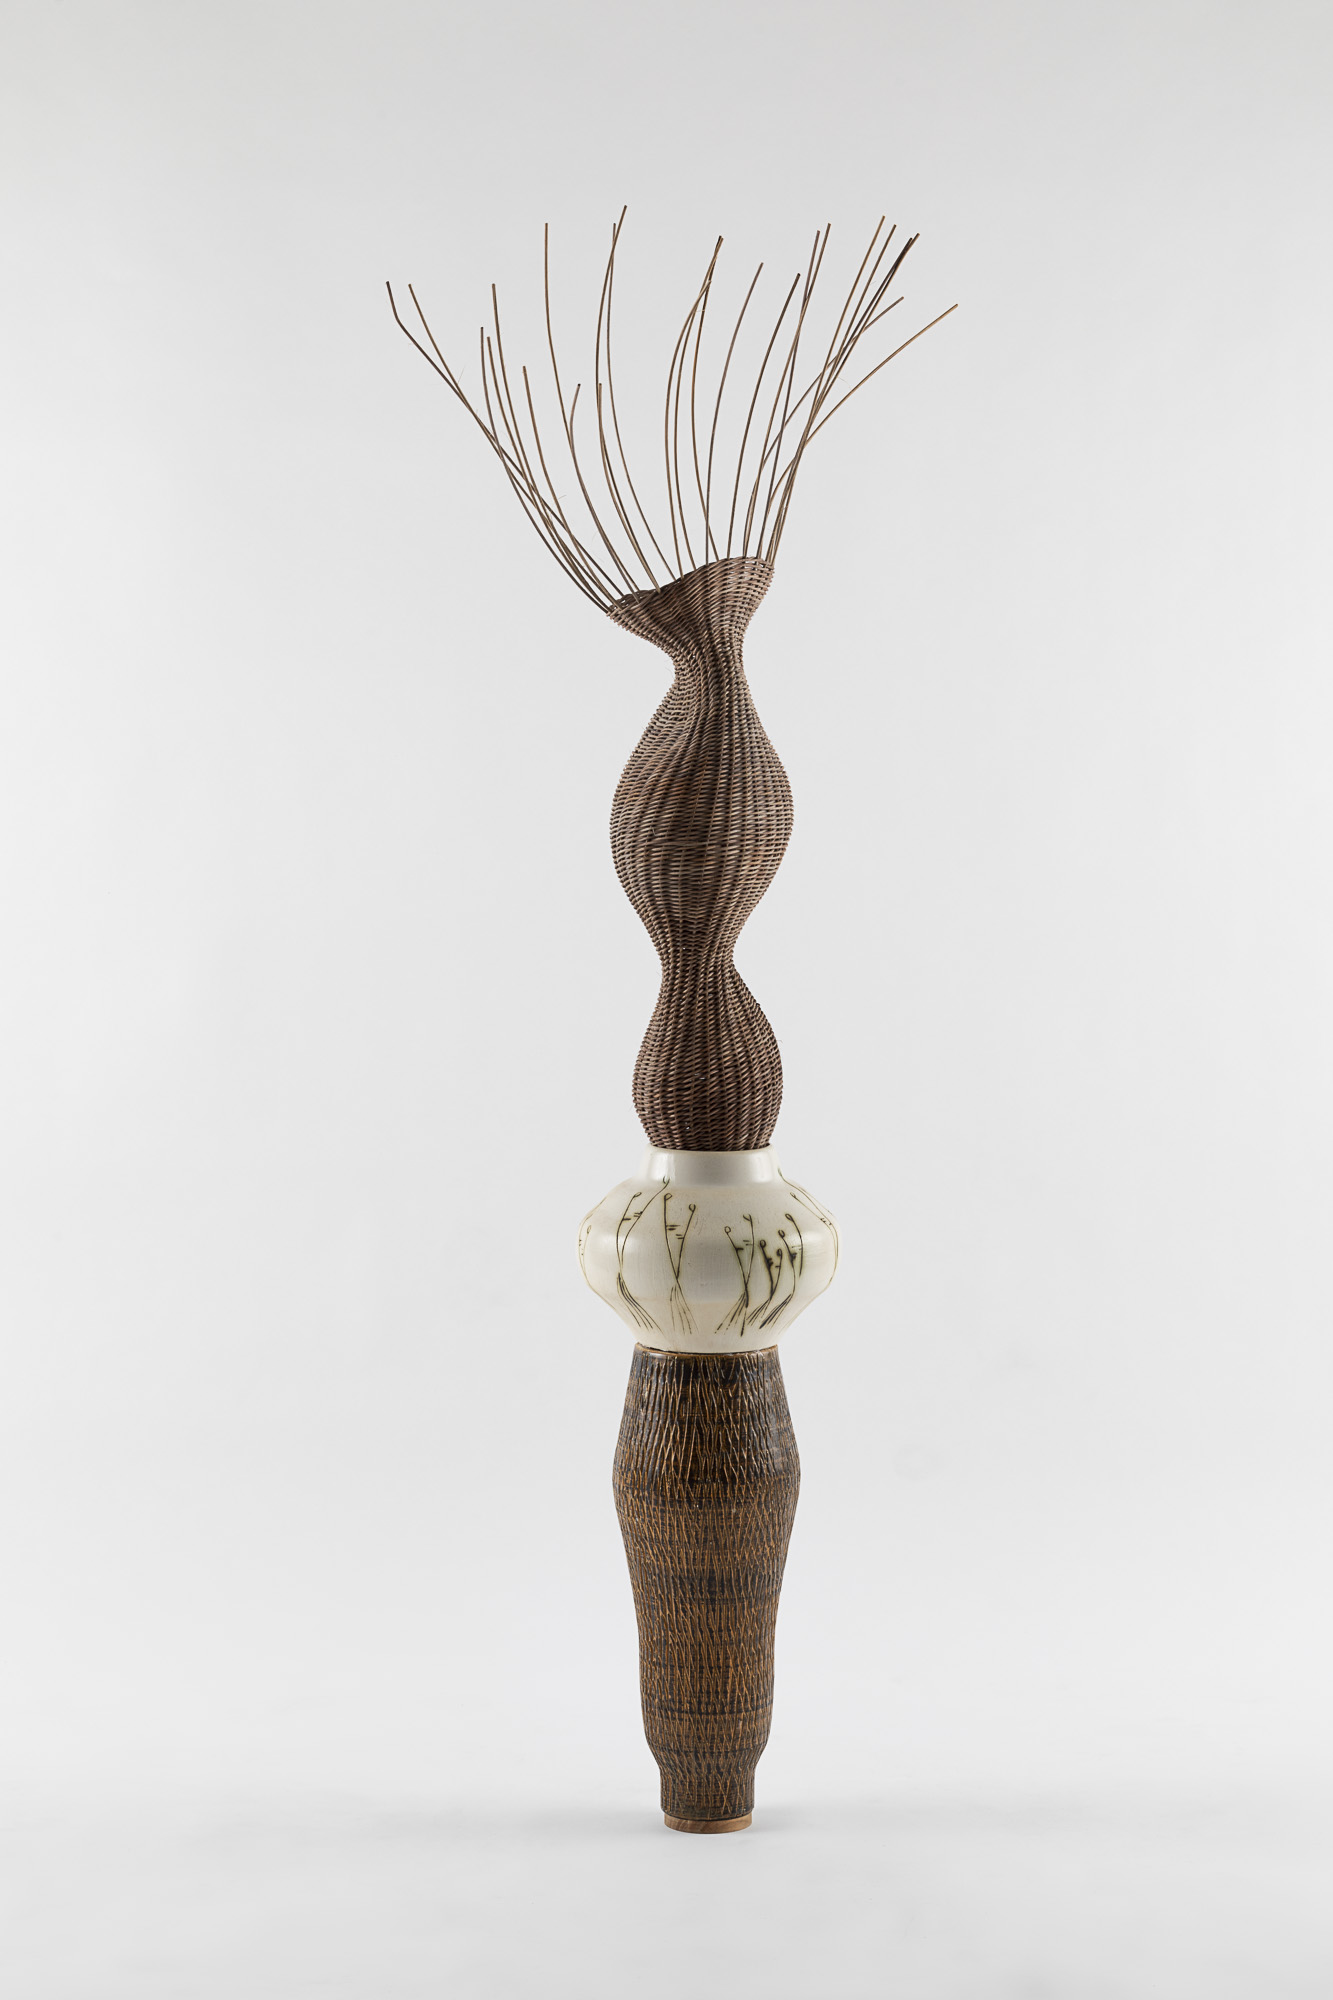 "Ritual Whisper",
2021,
Woven rattan and Israeli ceramics from the factories of Harsa & Kad Yad,
110x35x65 cm